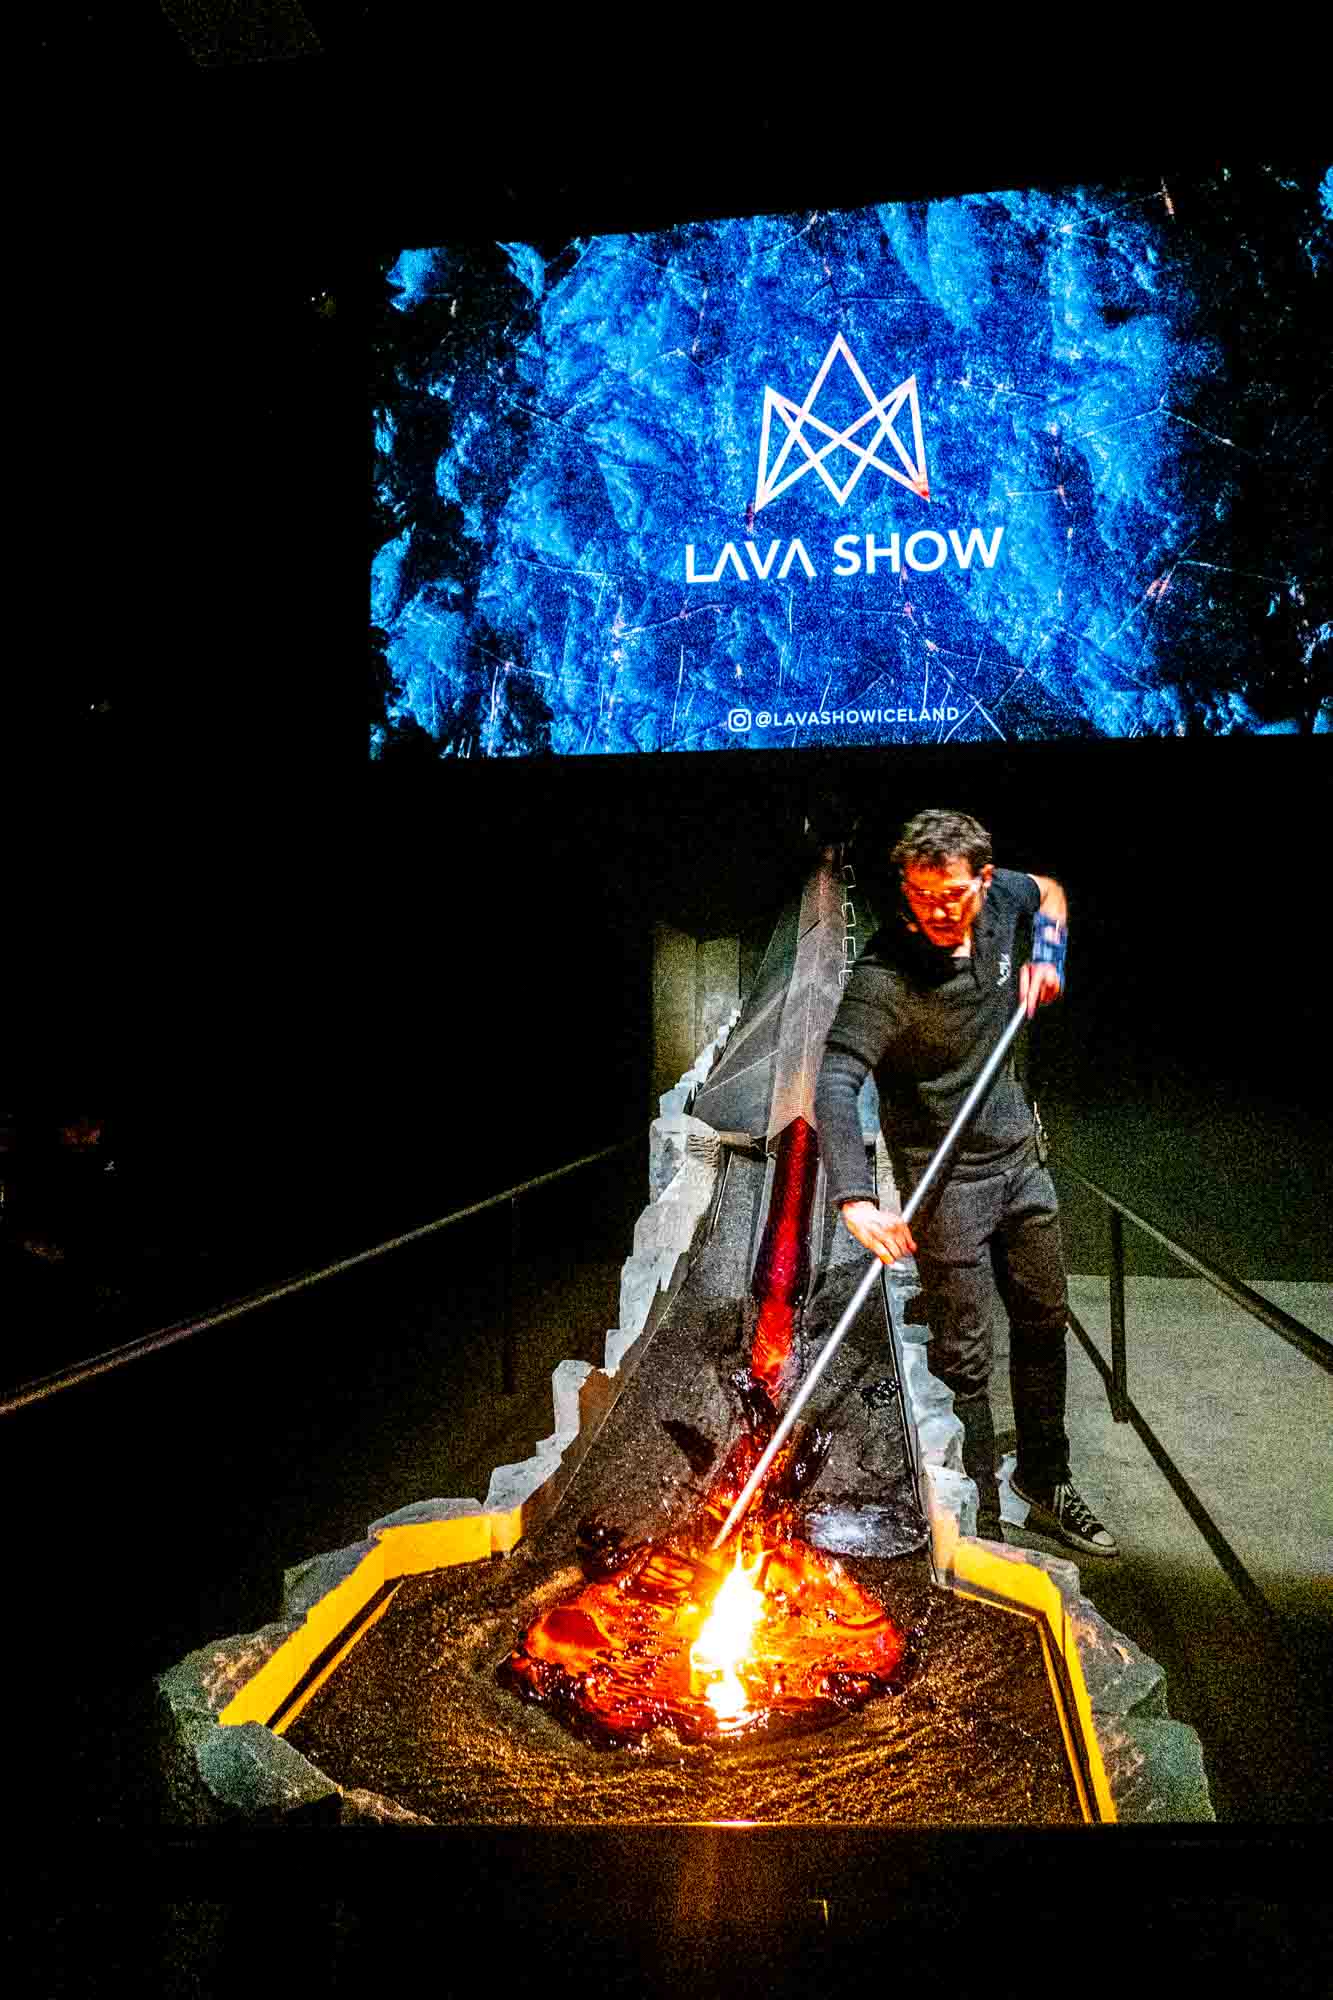 Man conducting demonstration with molten lava in front of a sign for "Lava Show."